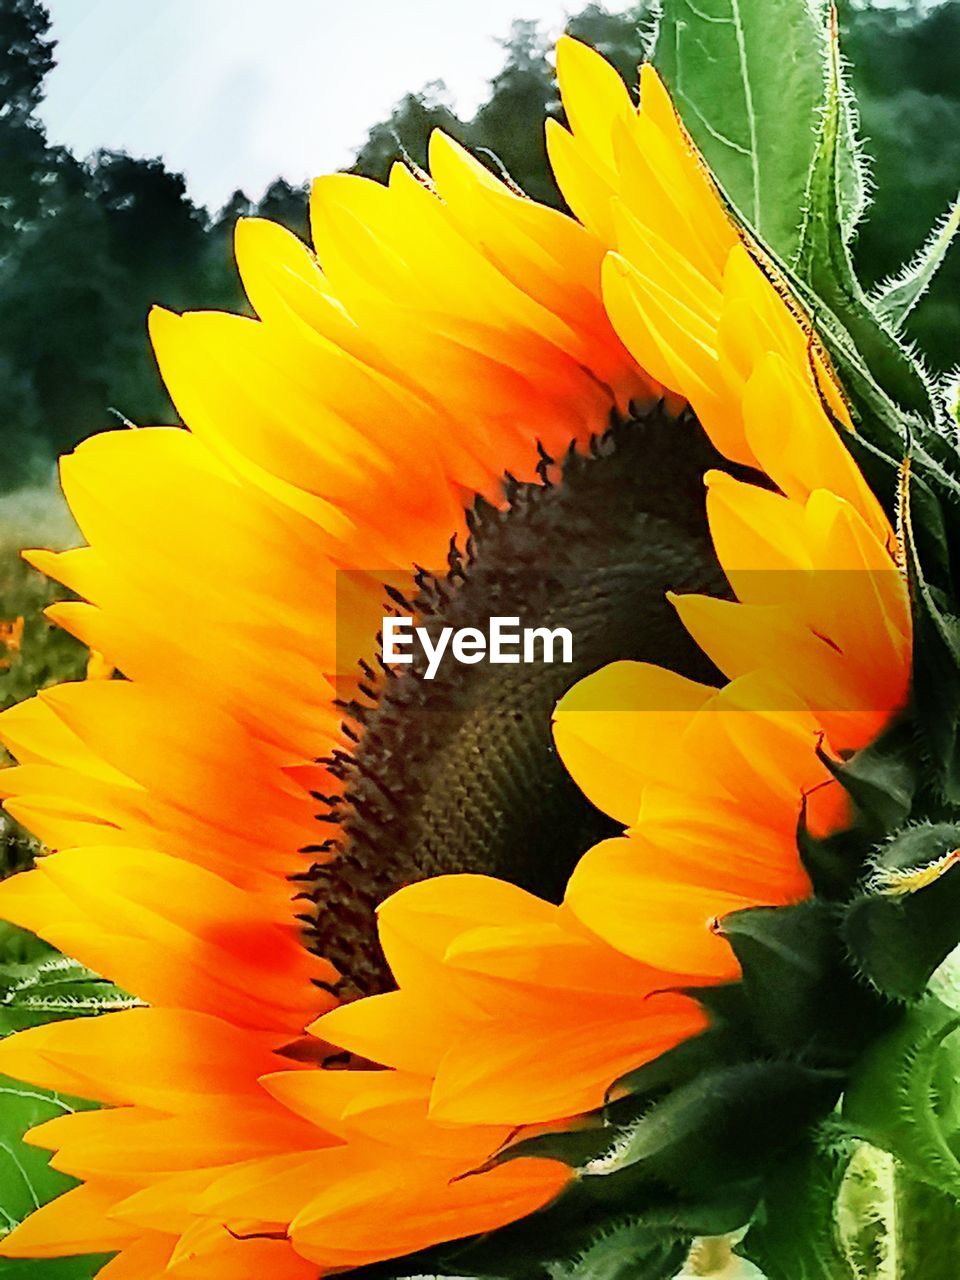 CLOSE-UP OF YELLOW SUNFLOWER ON PLANT AT DUSK